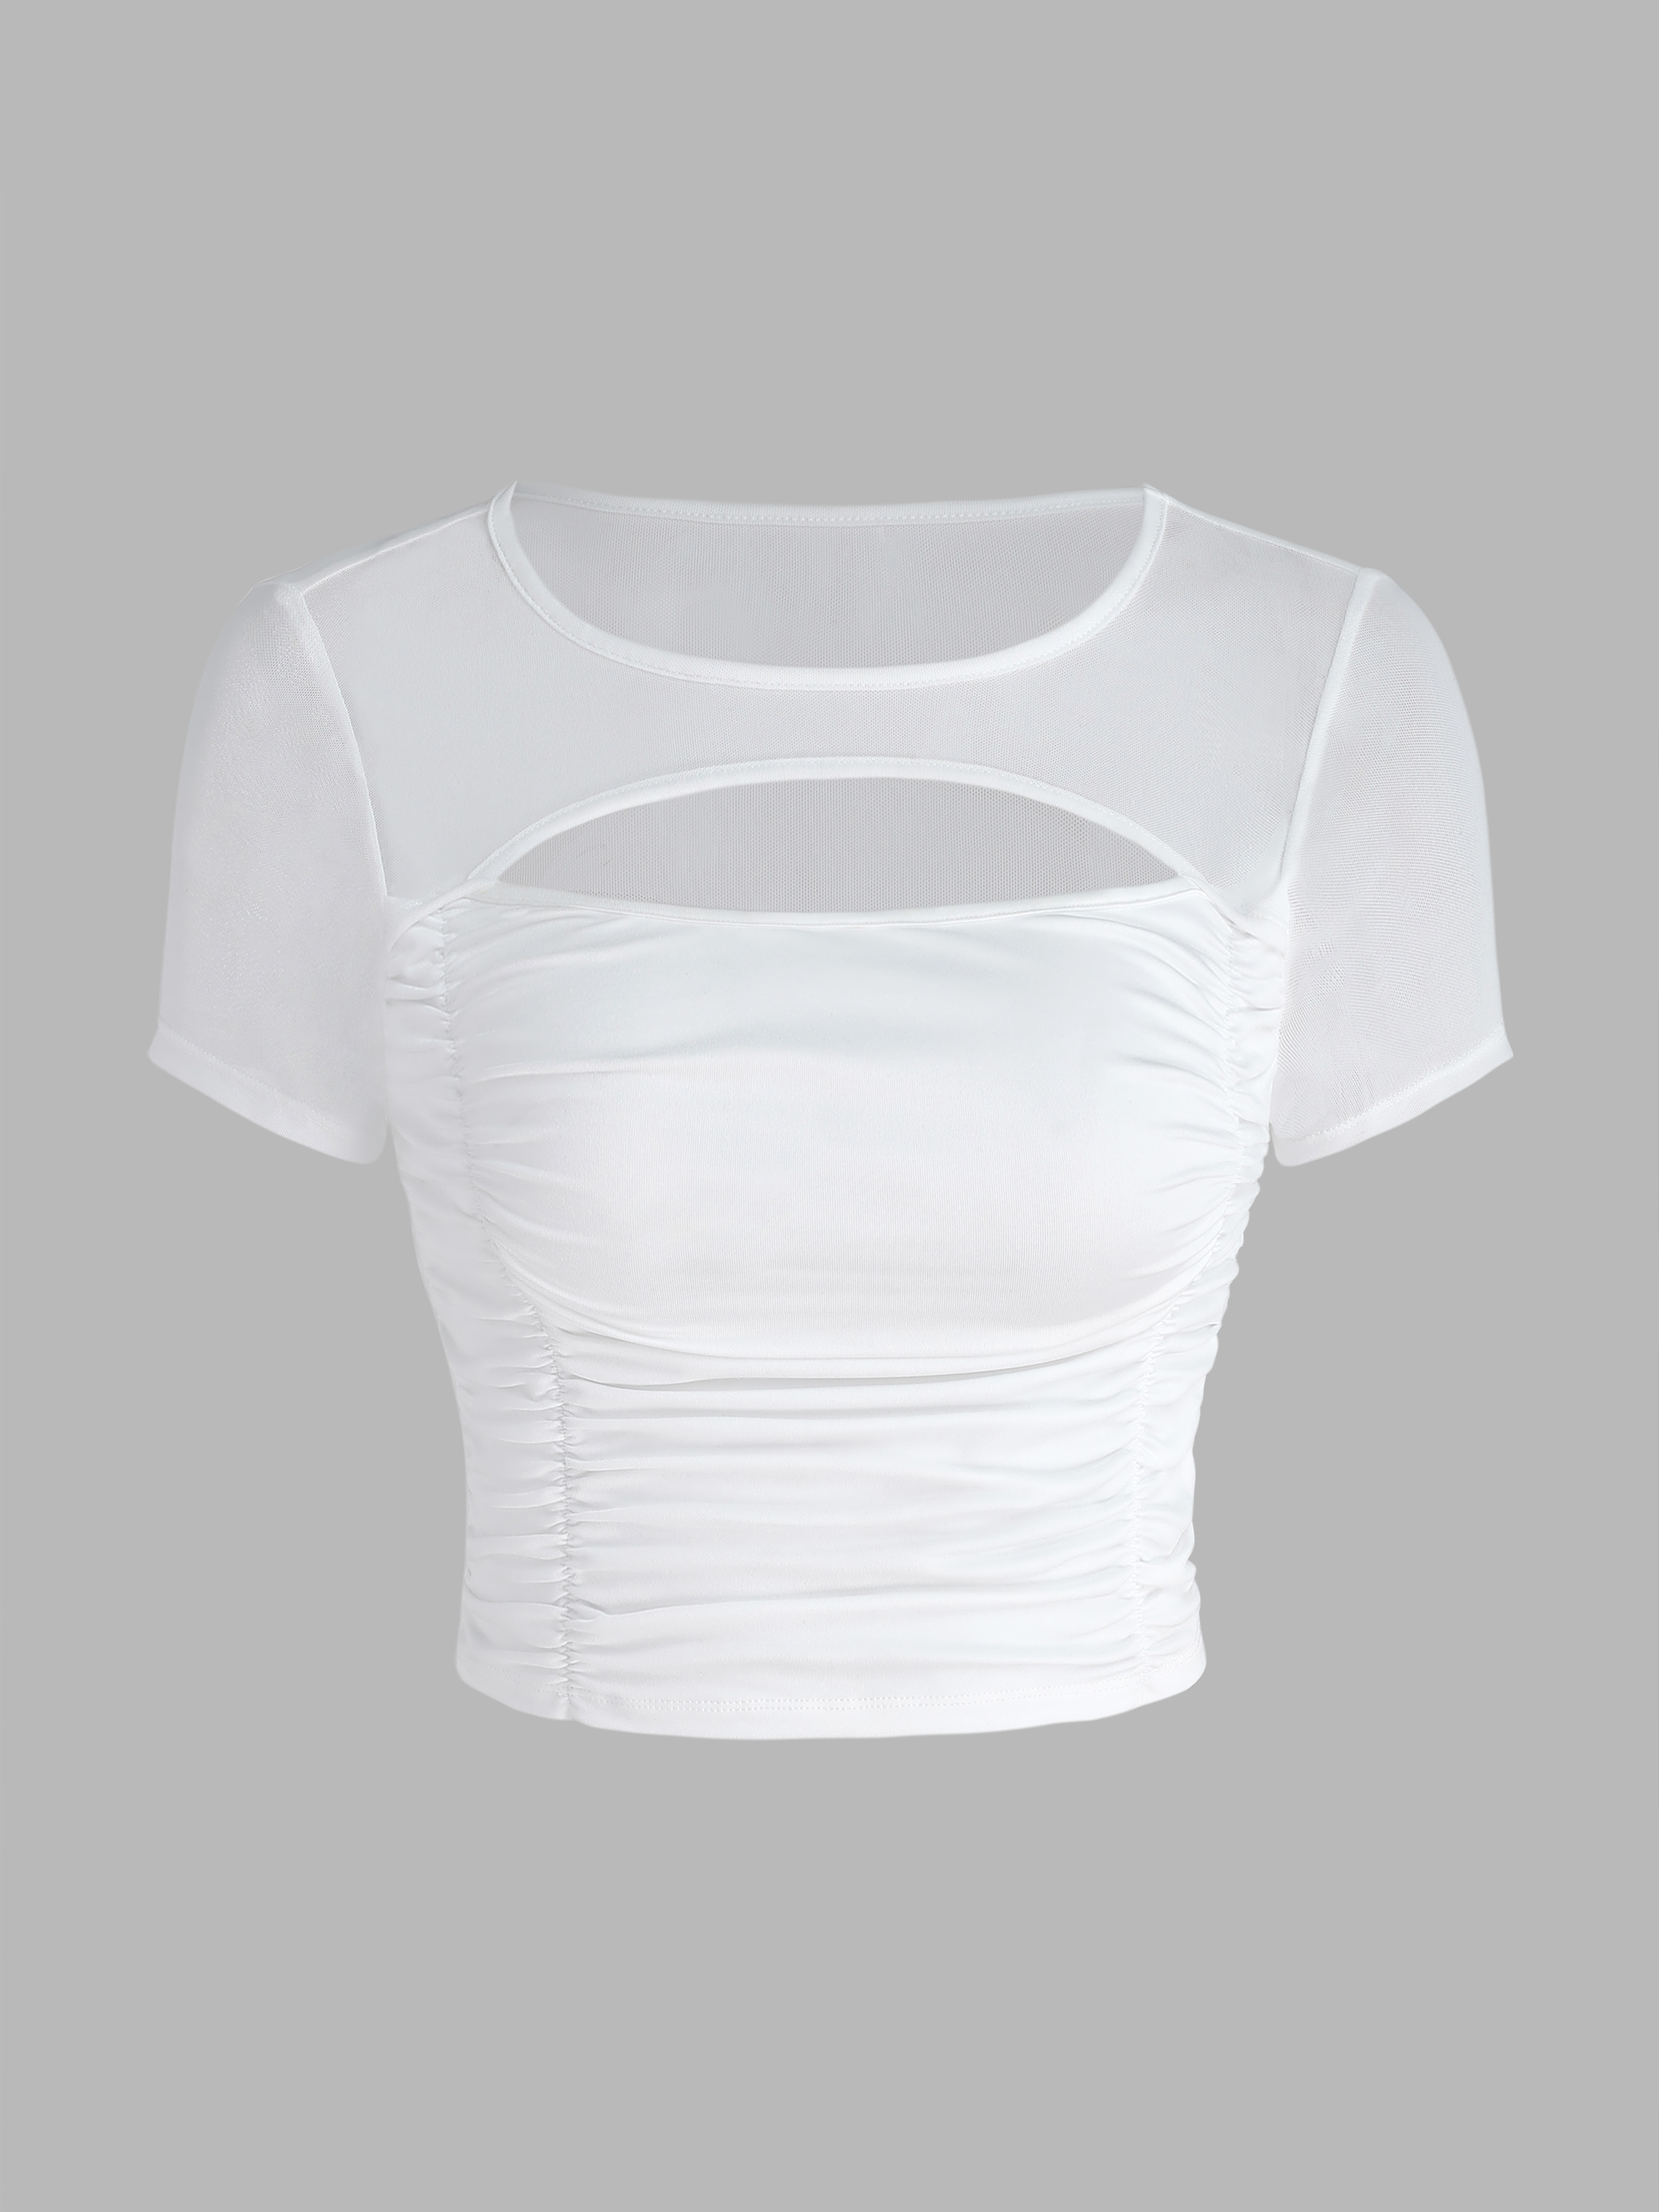 Mesh Ruched Cut Out Crop Tee - Cider